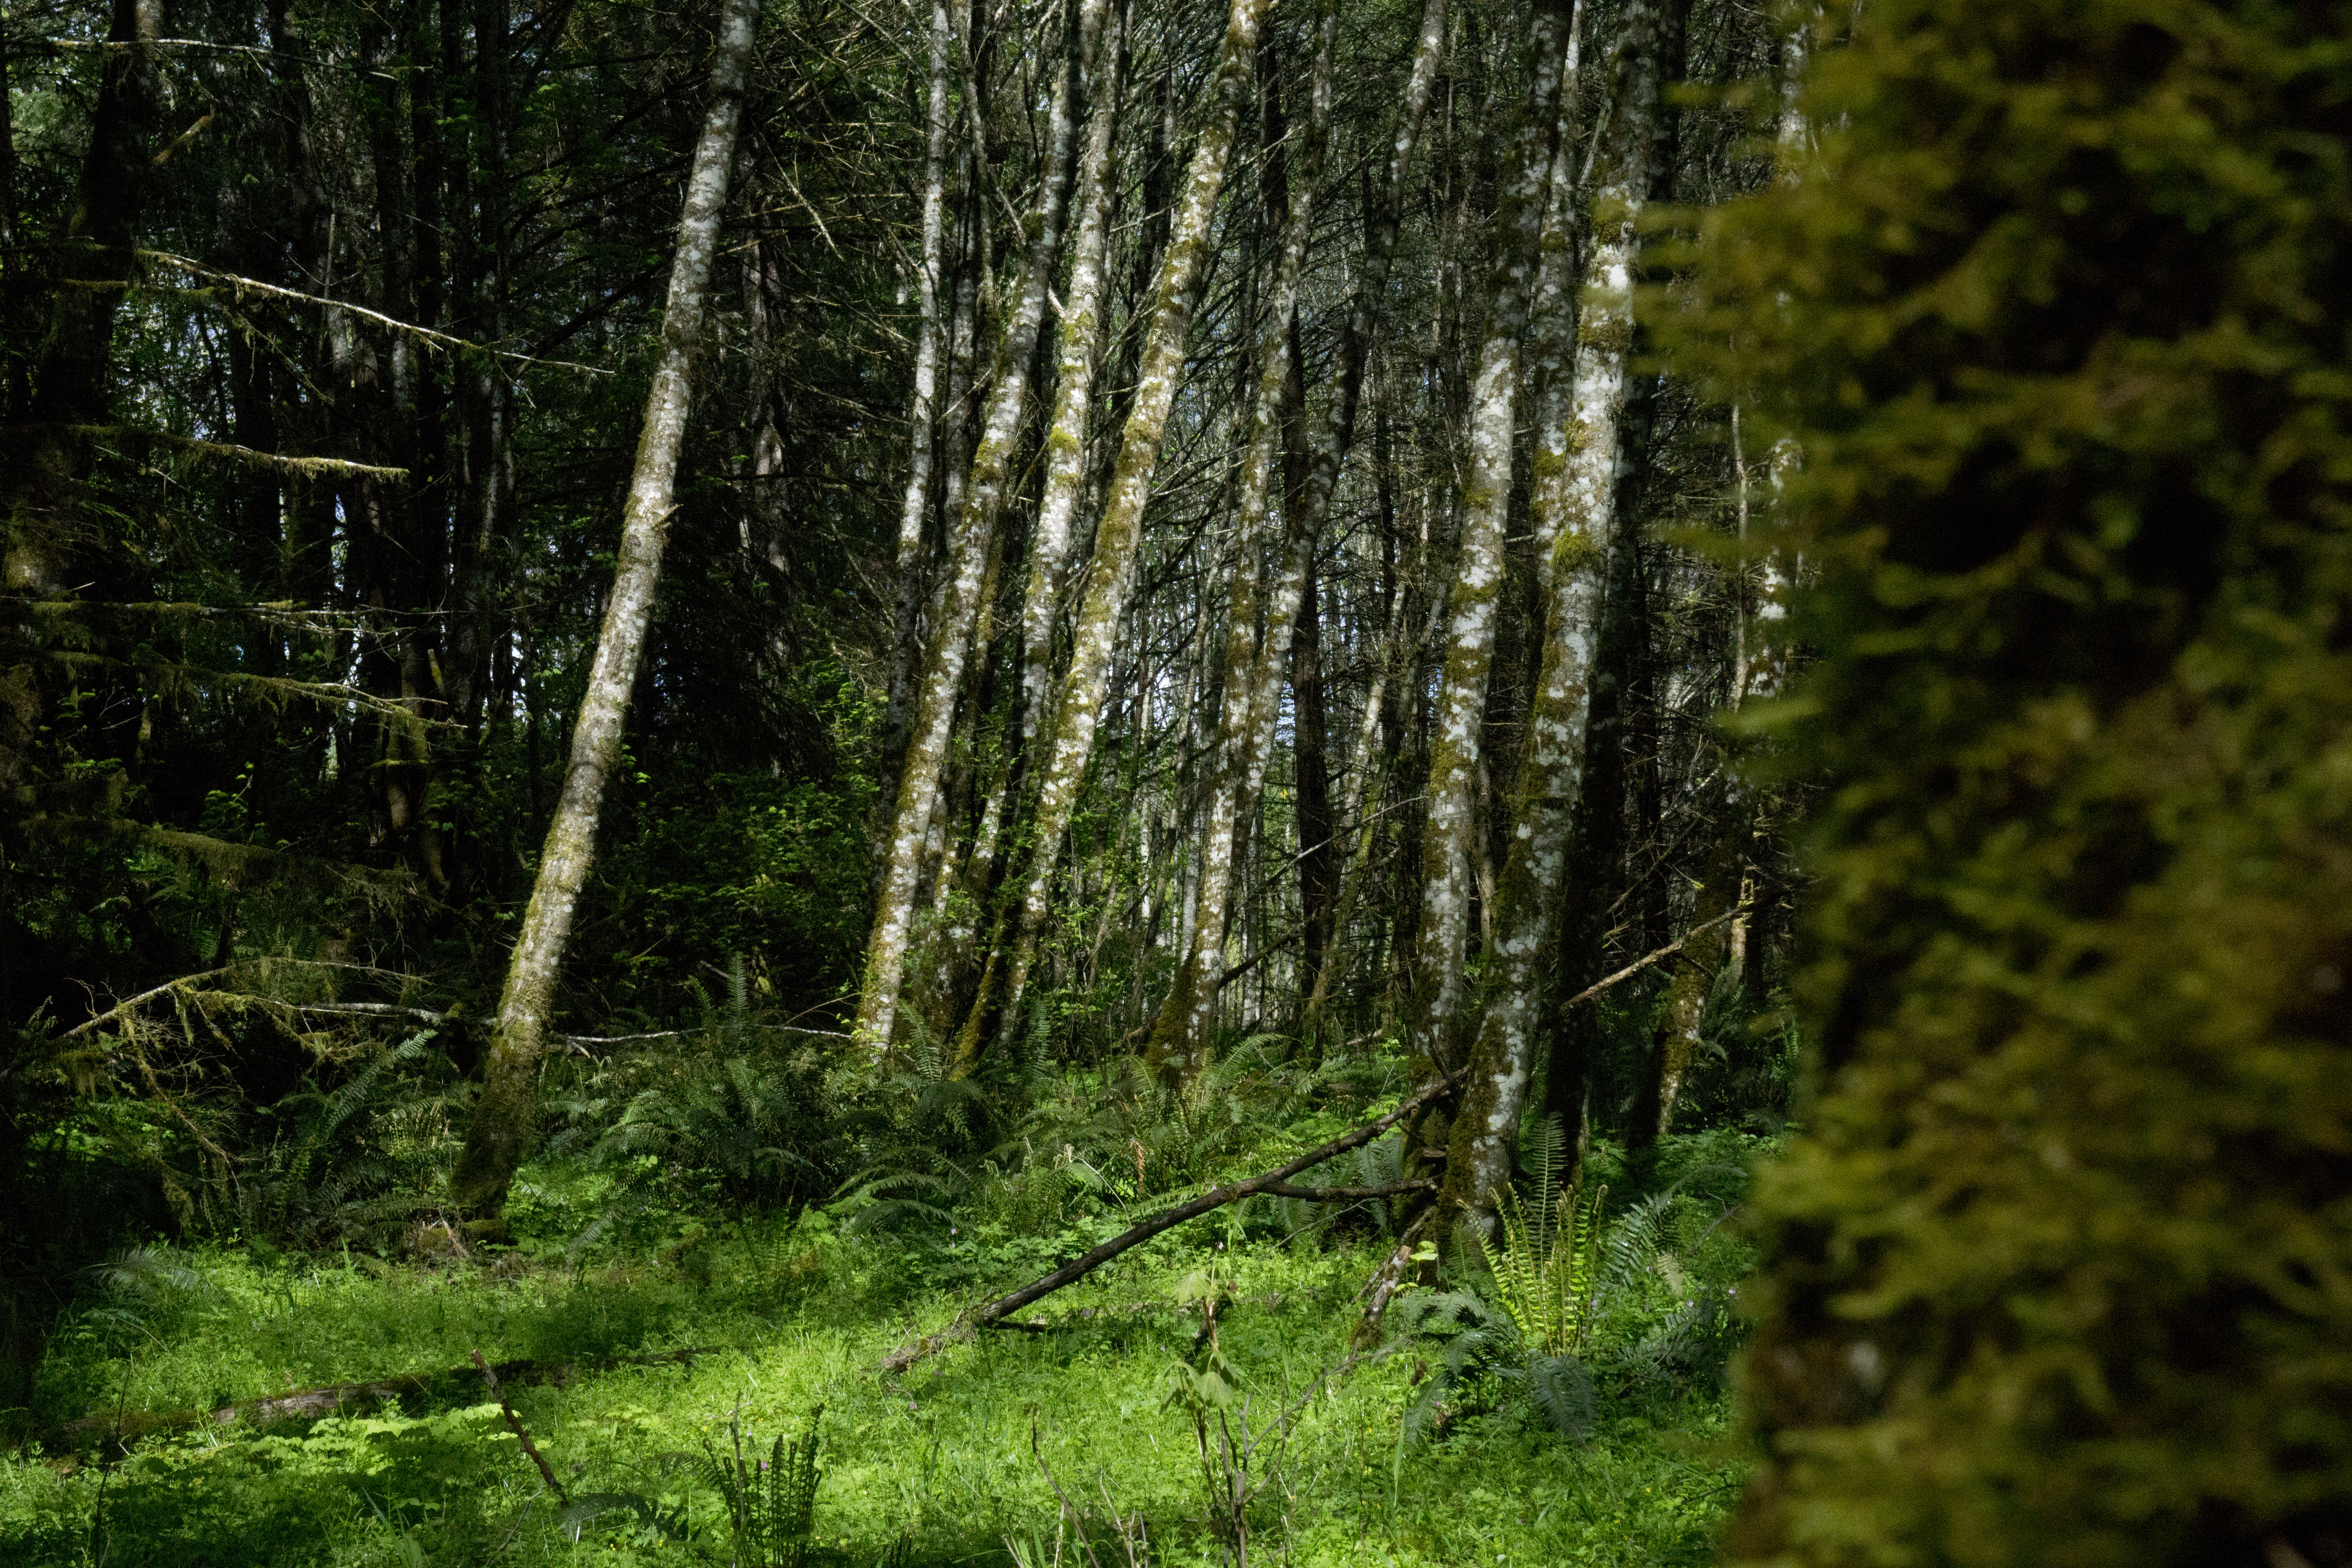 Can carbon markets help Oregon’s small forests?